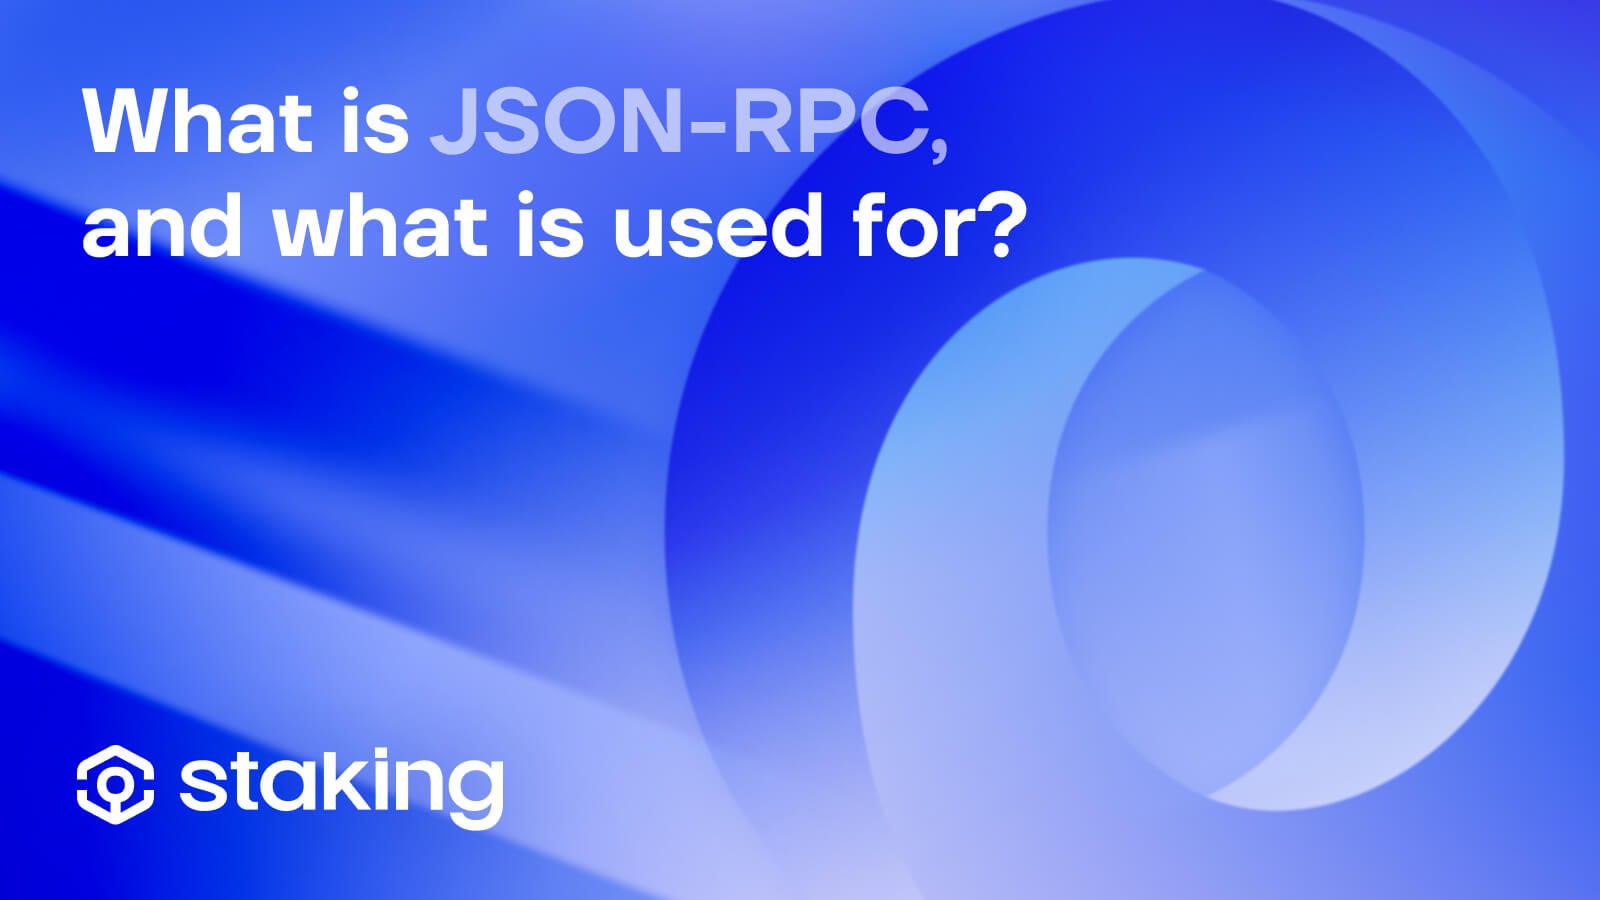 What is JSON-RPC, and what is used for?